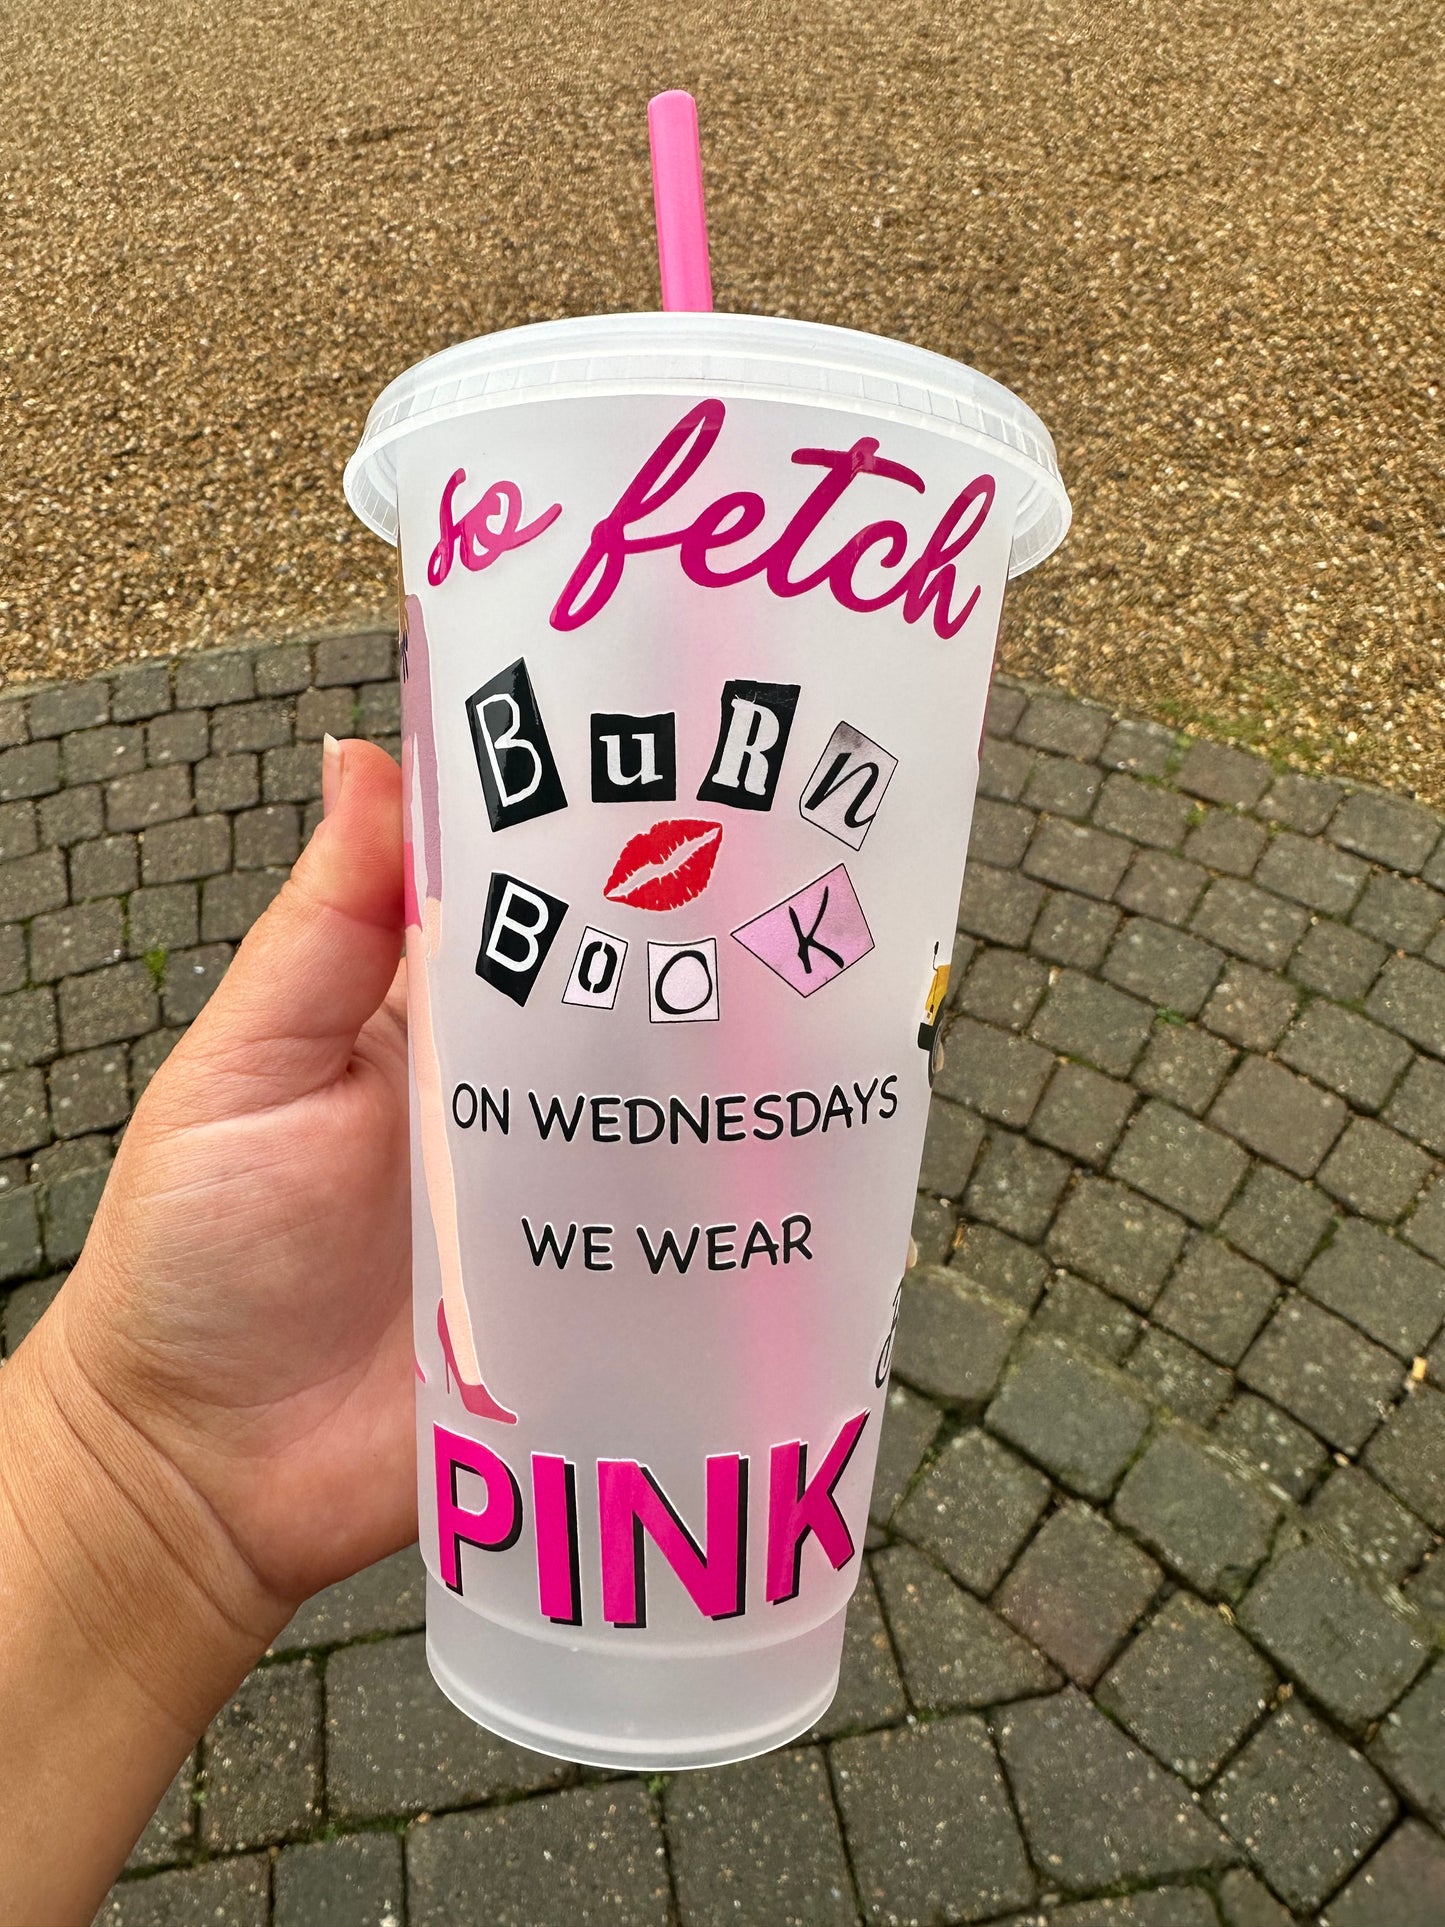 Mean girls cold cup